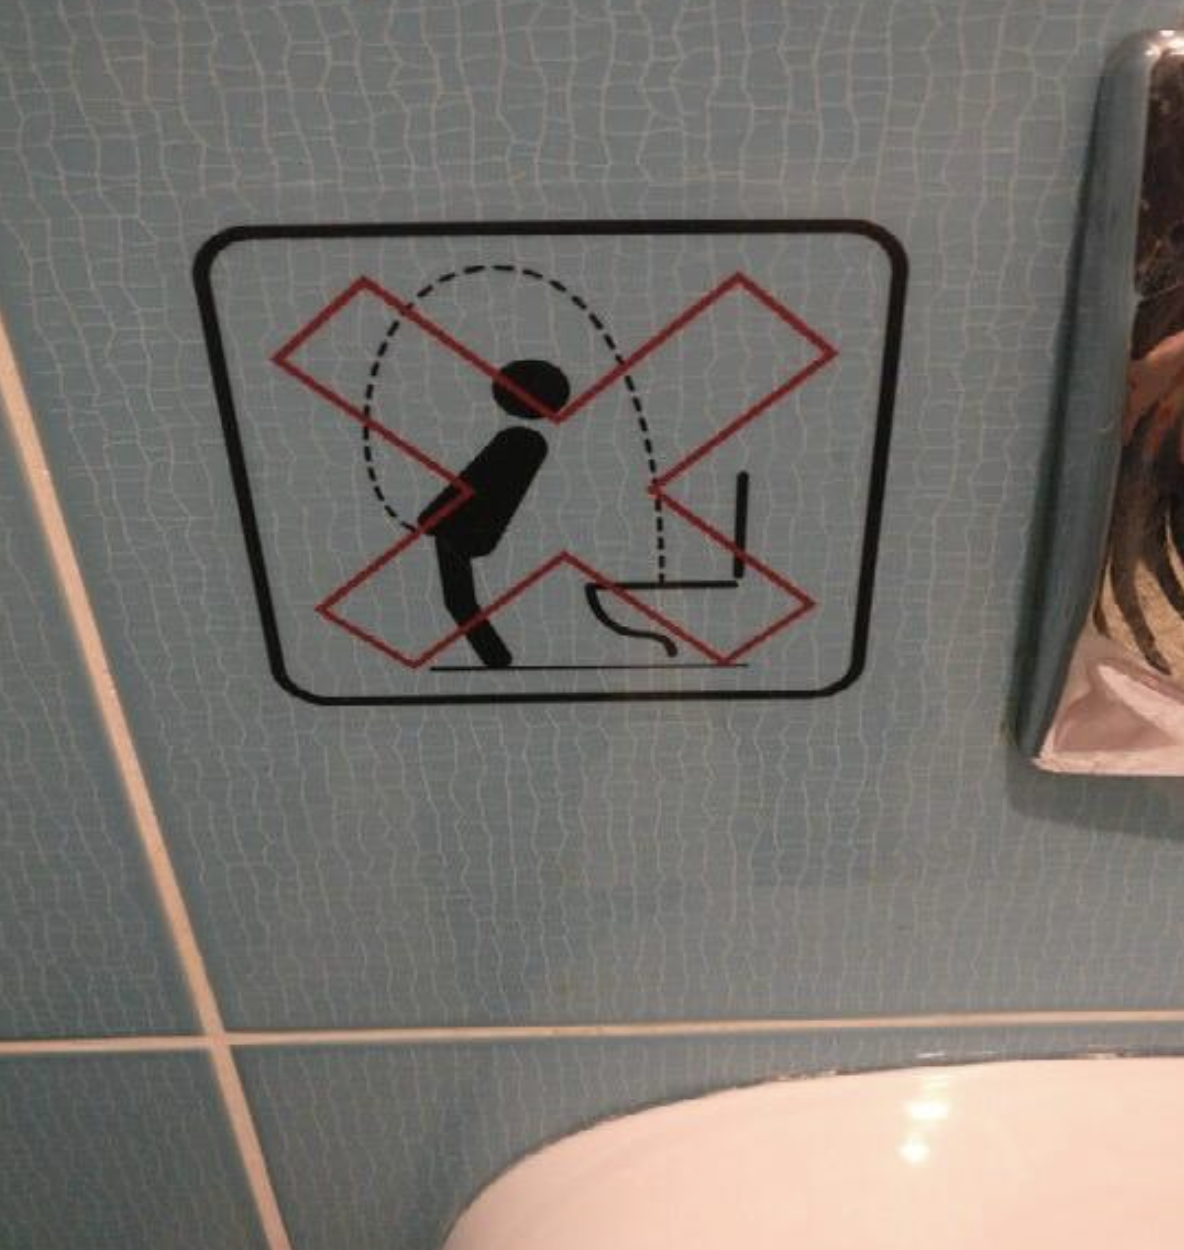 Sign depicting no drinking from toilet with a stick figure and a red cross over it